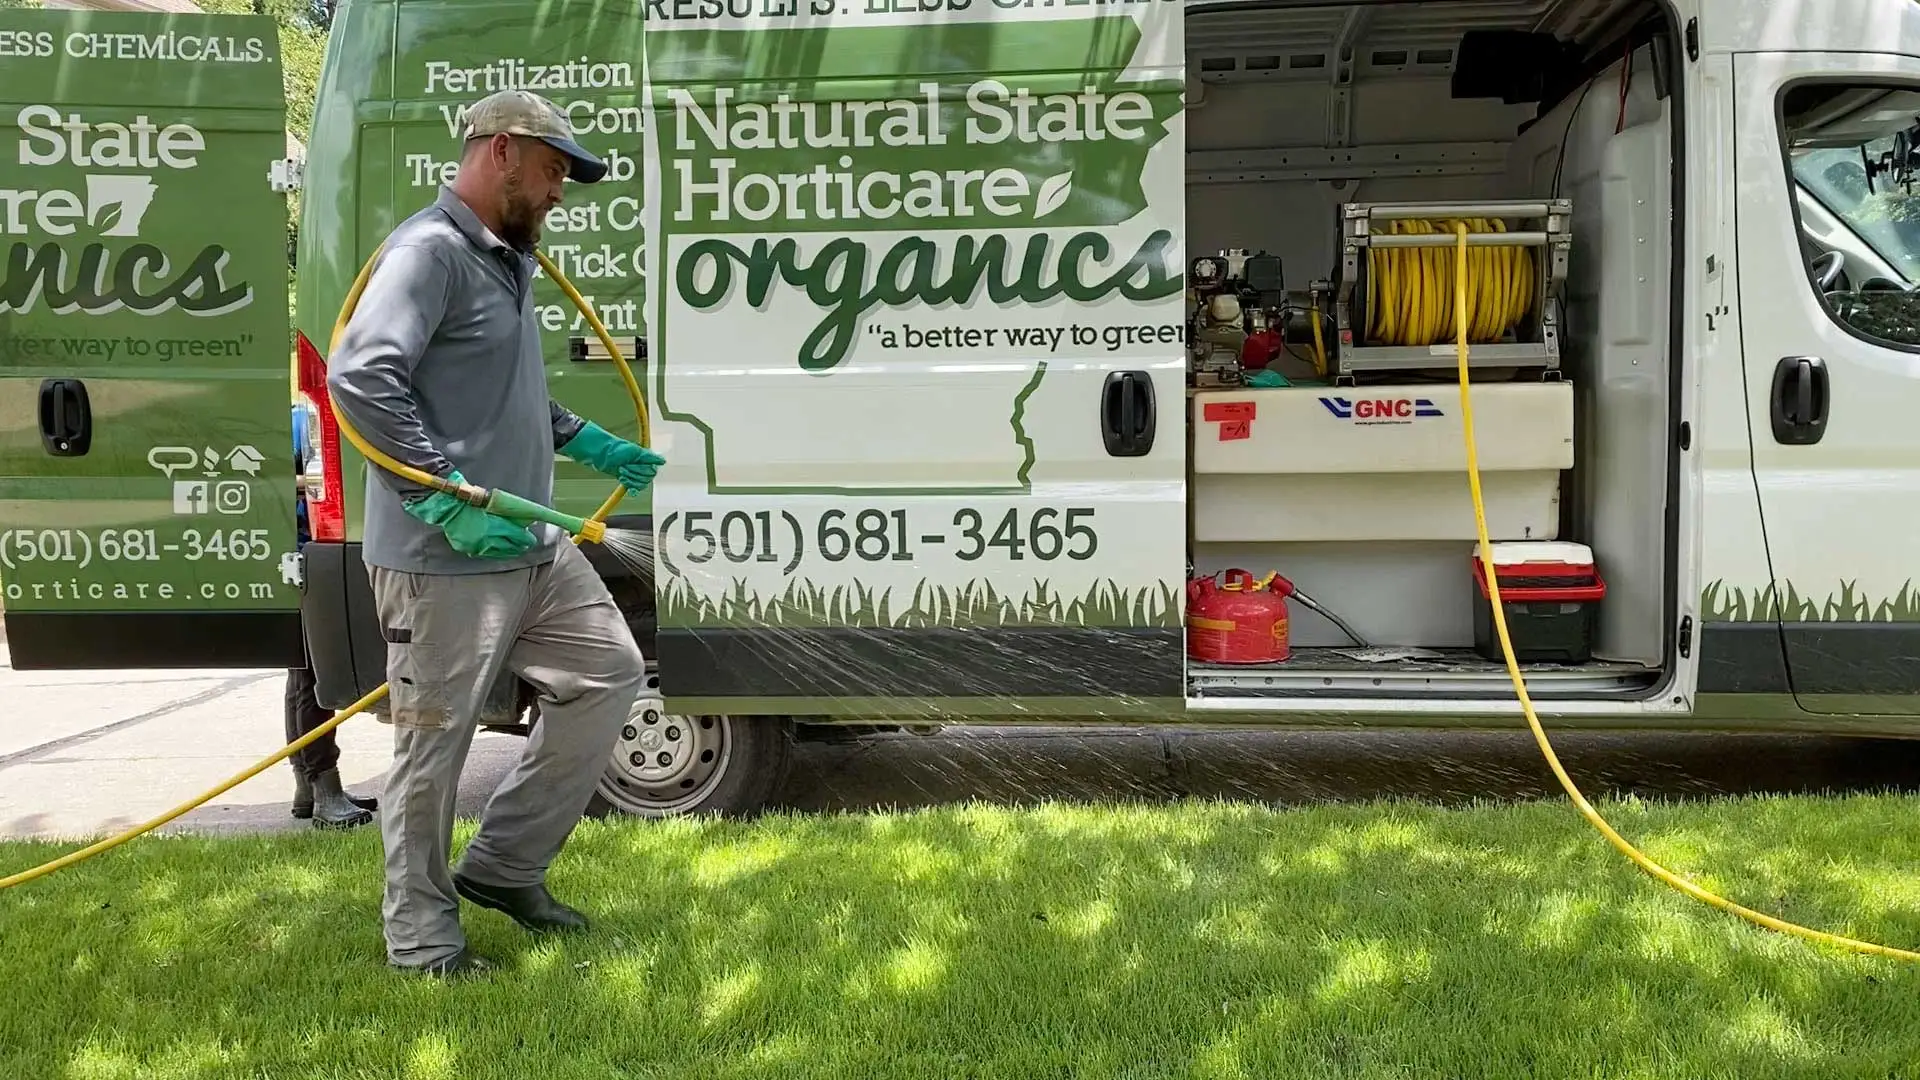 Natural State Horticare work truck and technician at a home in Little Rock, AR.